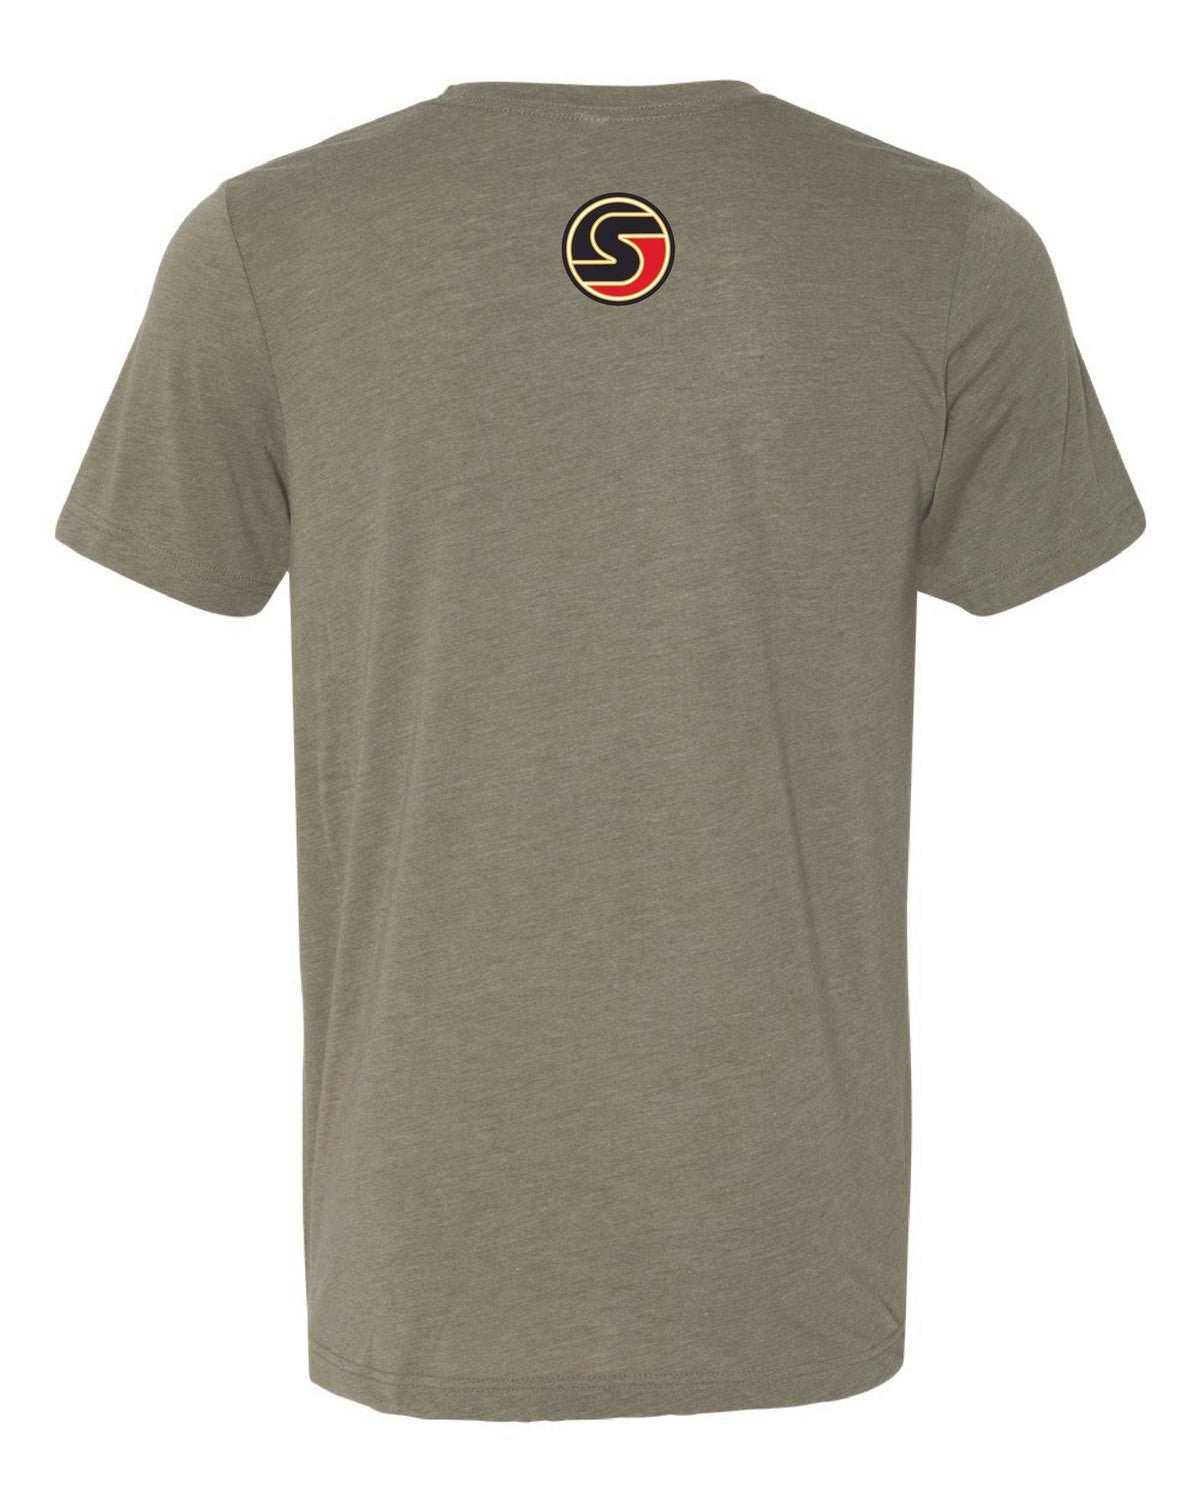 THE DOMINATOR TEE IN HEATHERED OLIVE